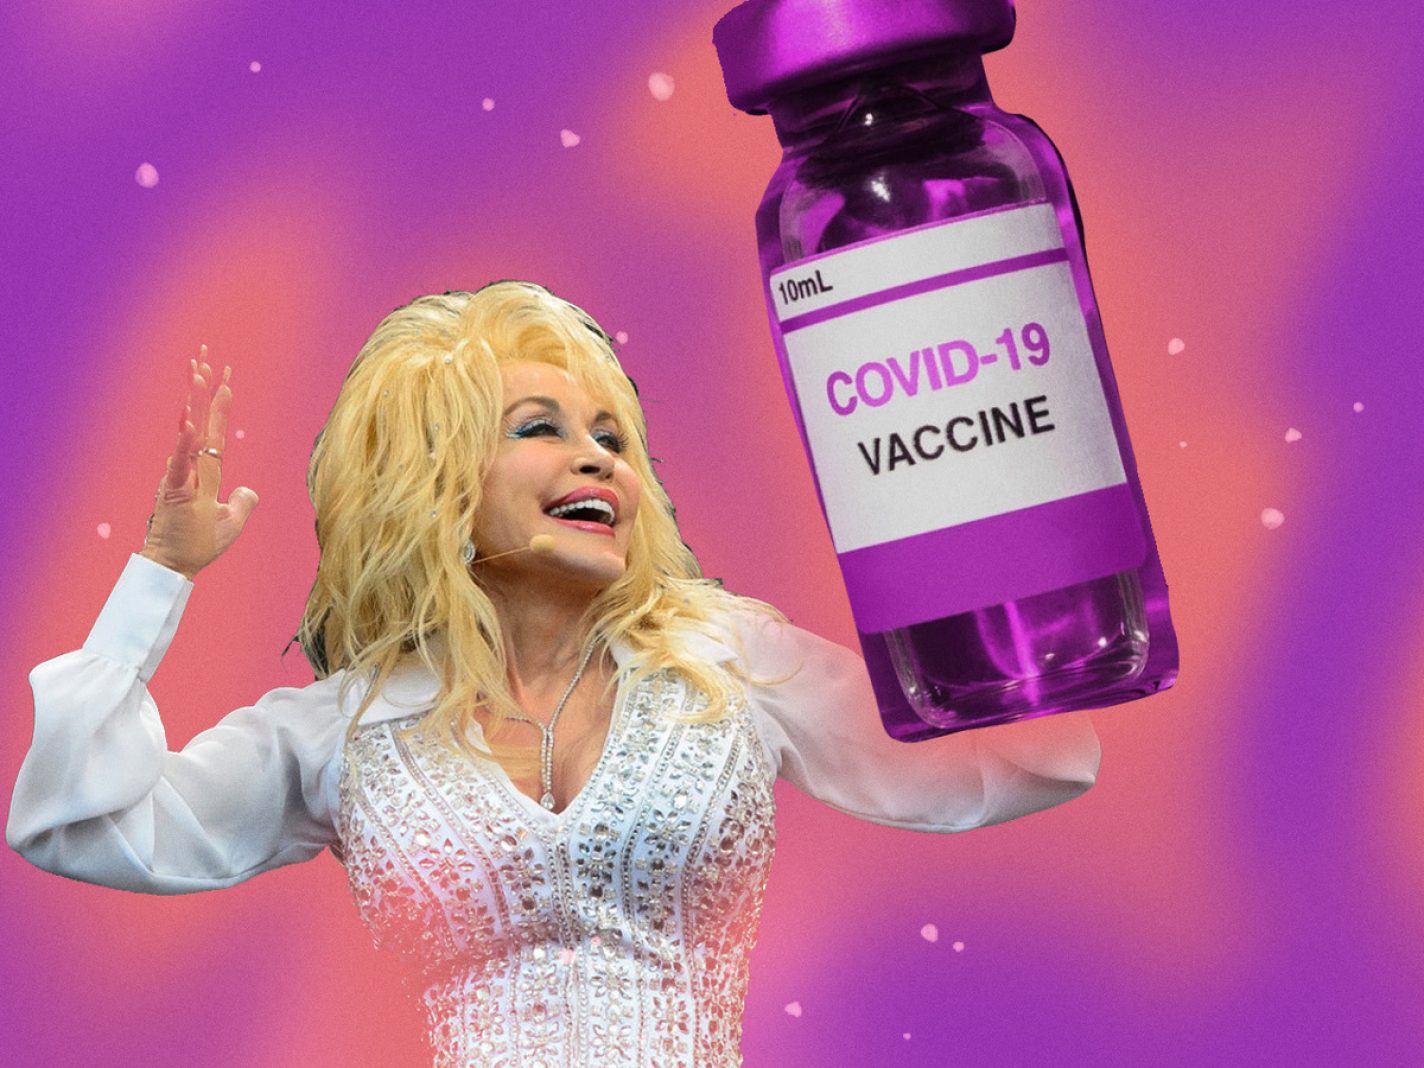 The Queen Dolly Parton Helped Fund the Moderna COVID-19 Vaccine